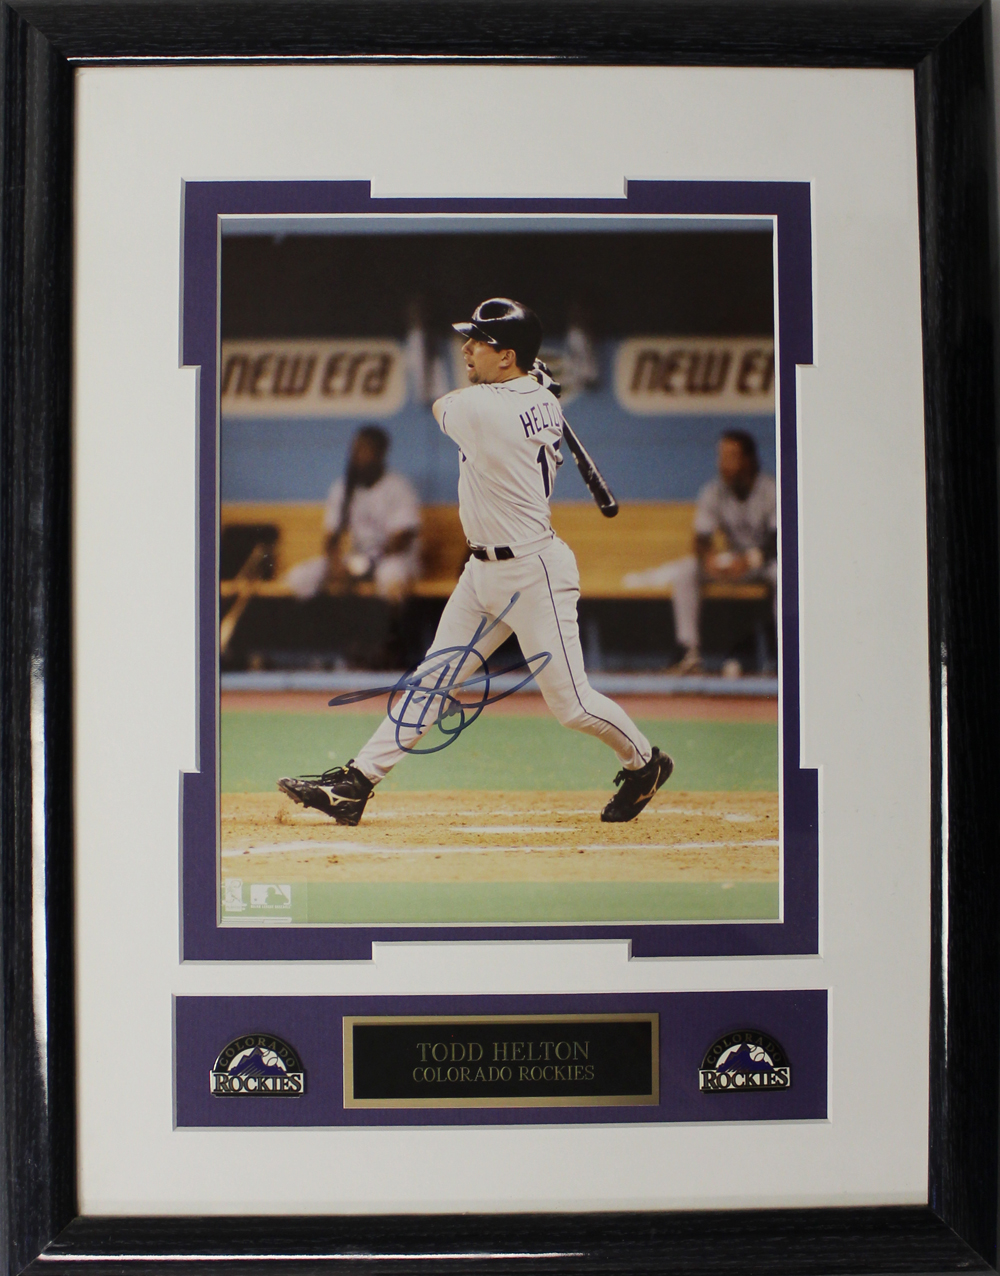 Todd Helton Autographed/Signed Colorado Rockies Framed 8x10 Photo